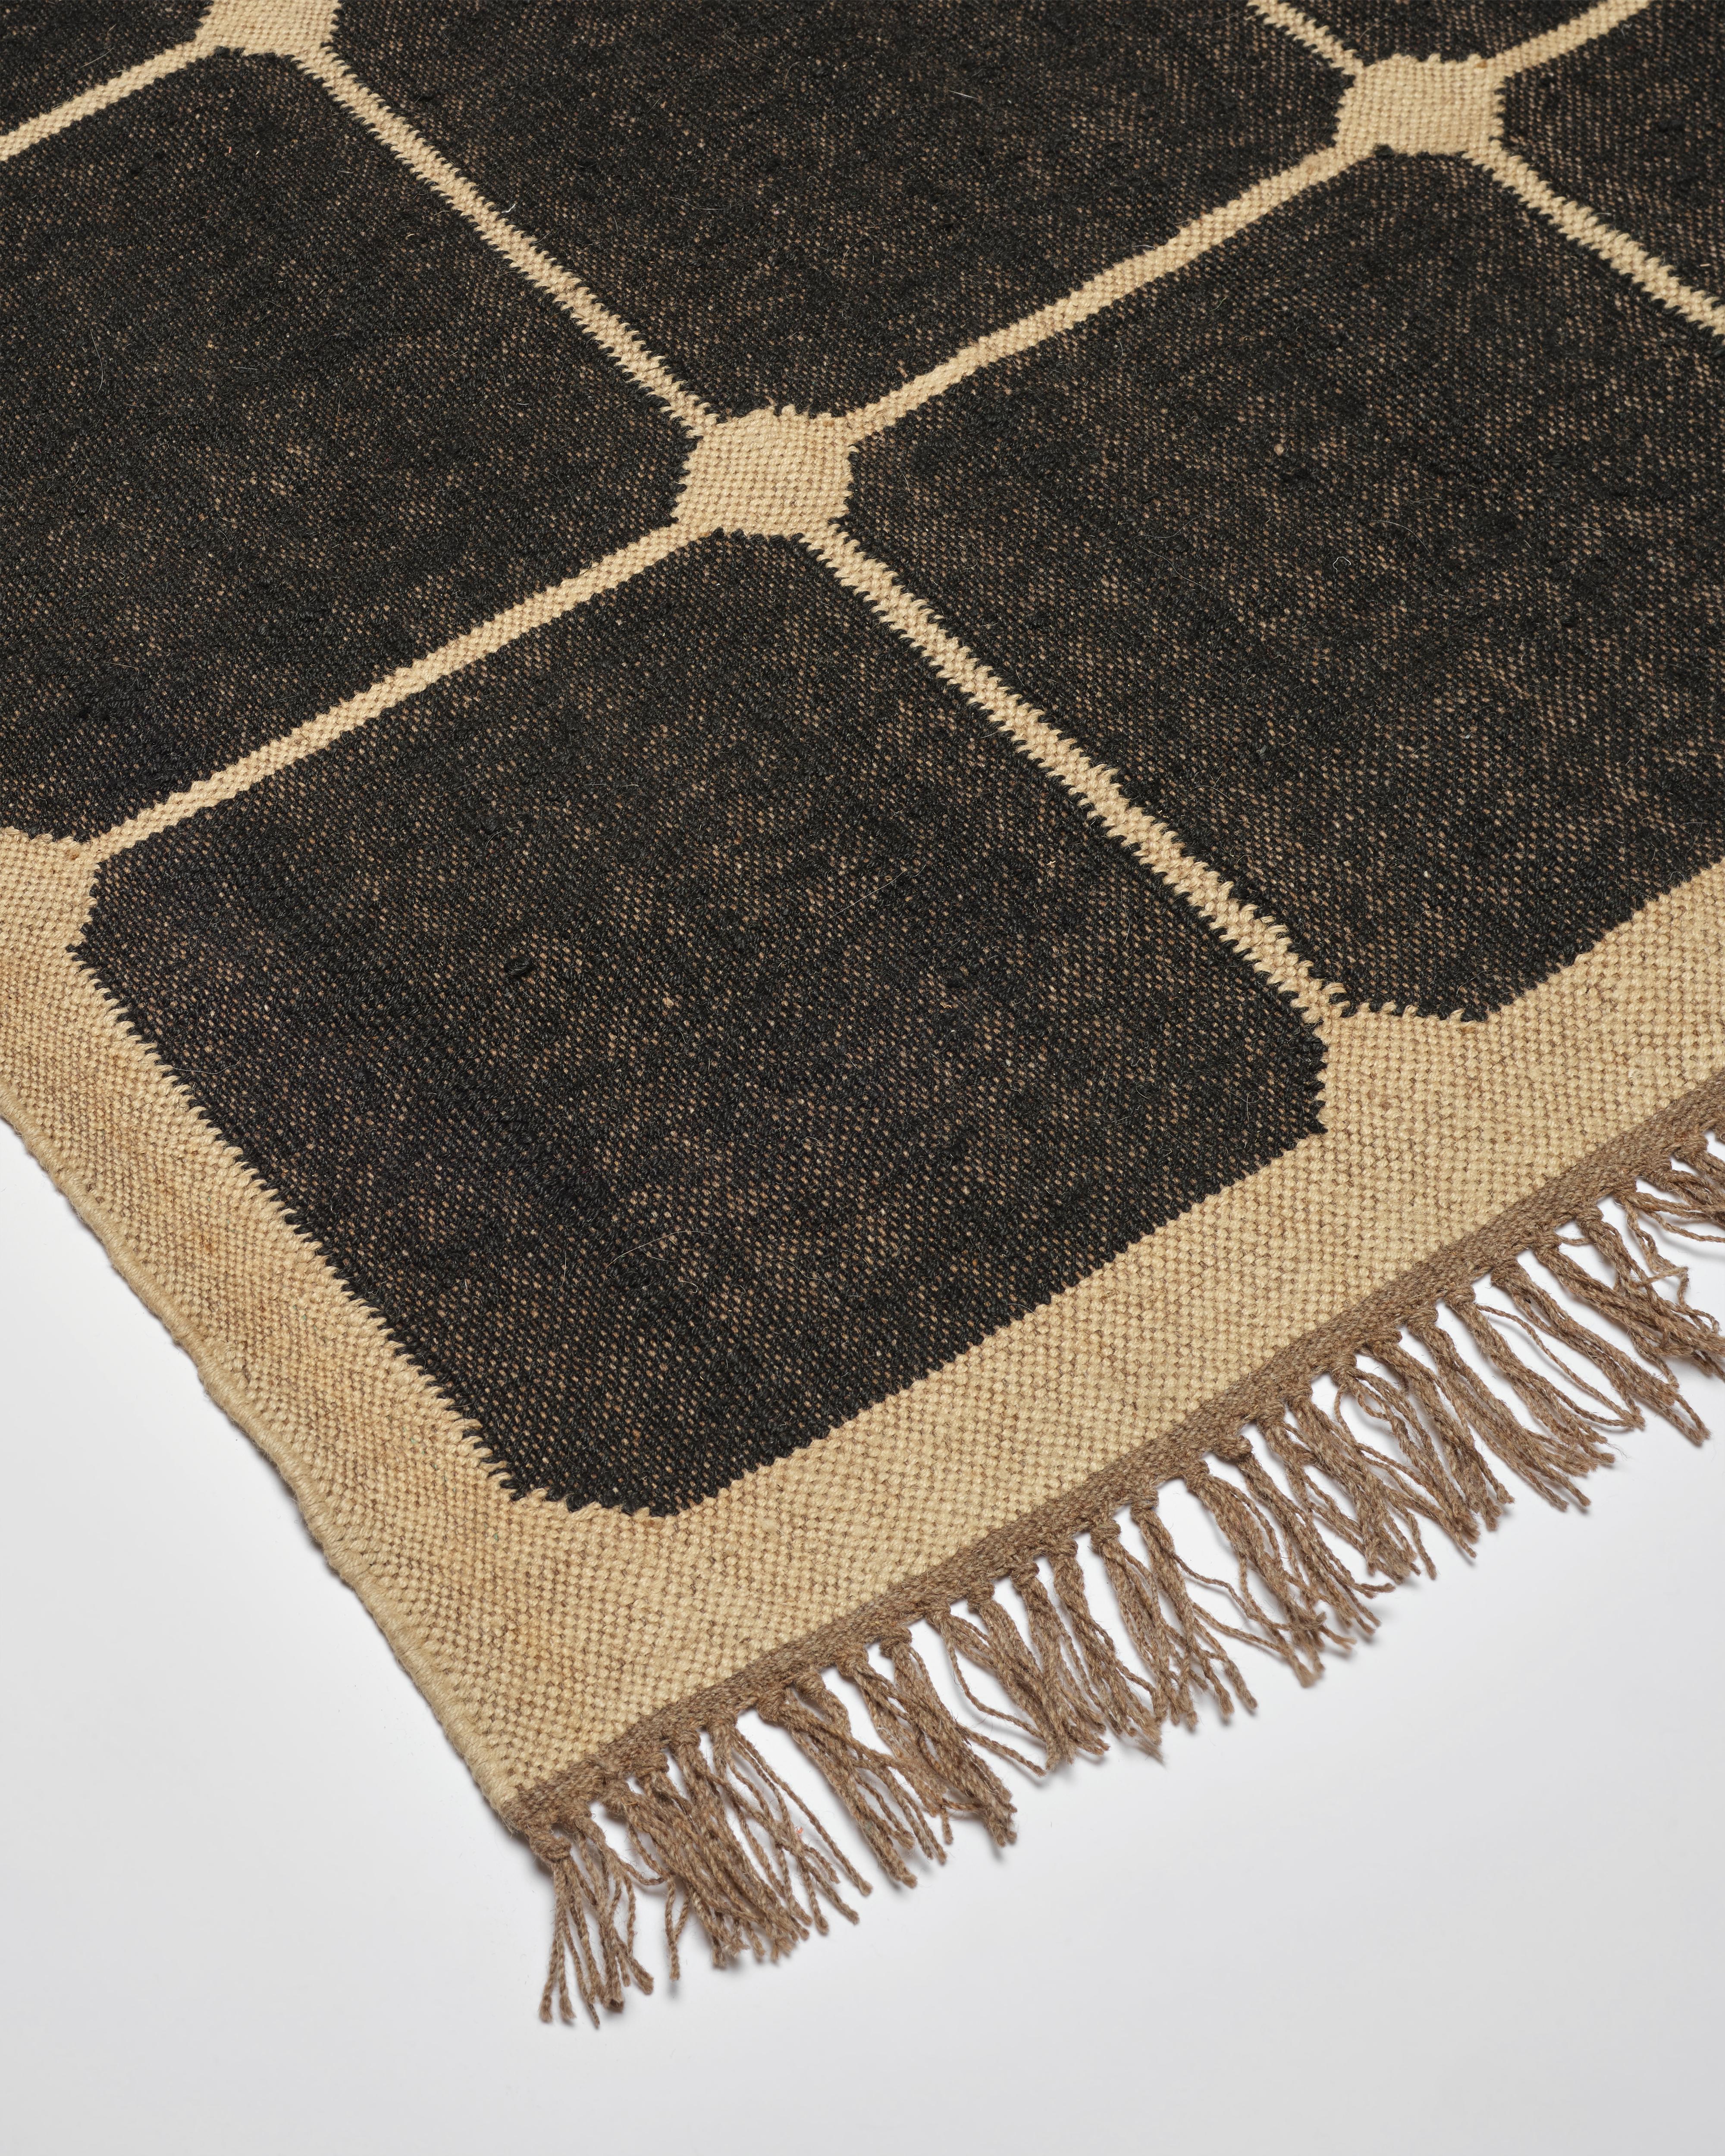 Our beautiful wool and jute checkerboard rugs are expertly handwoven in Jaipur, India. The checkerboard pattern and neutral off black & natural coloring are chic and sophisticated with a hint of bohemian cool. The flat weave is perfect for layering